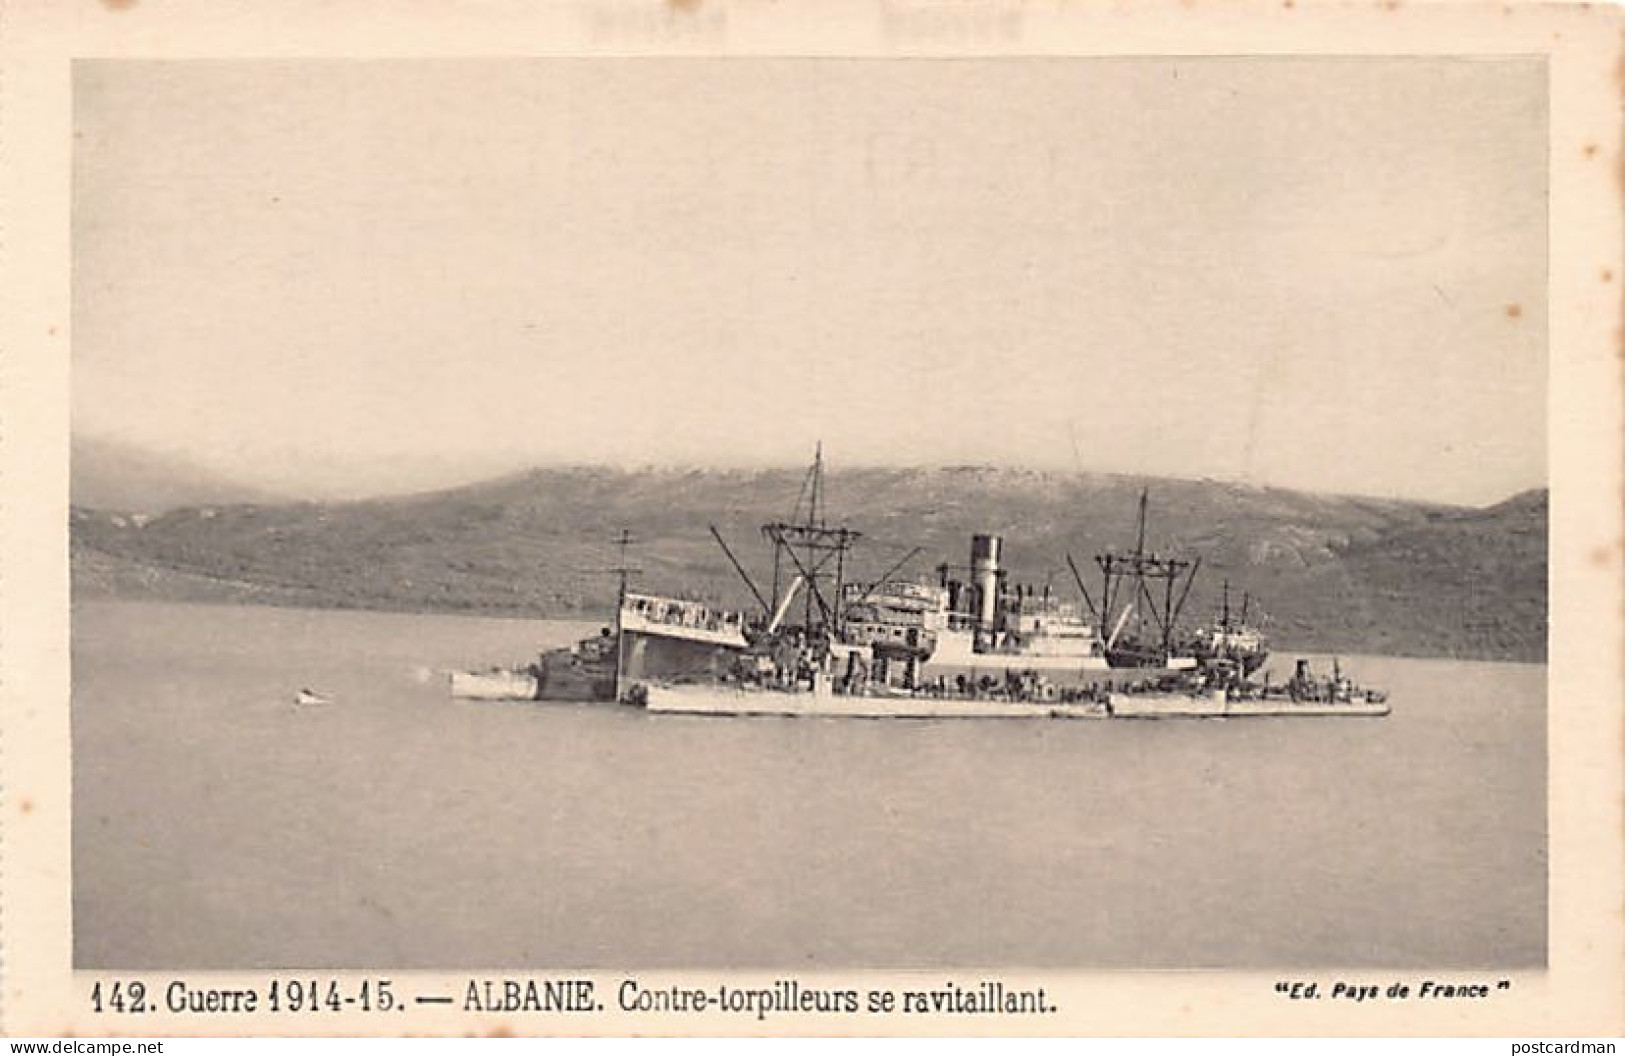 Albania - World War One - French Destroyers Refueling Off The Albanian Coast - Publ. Pays De France 142 - Albanie